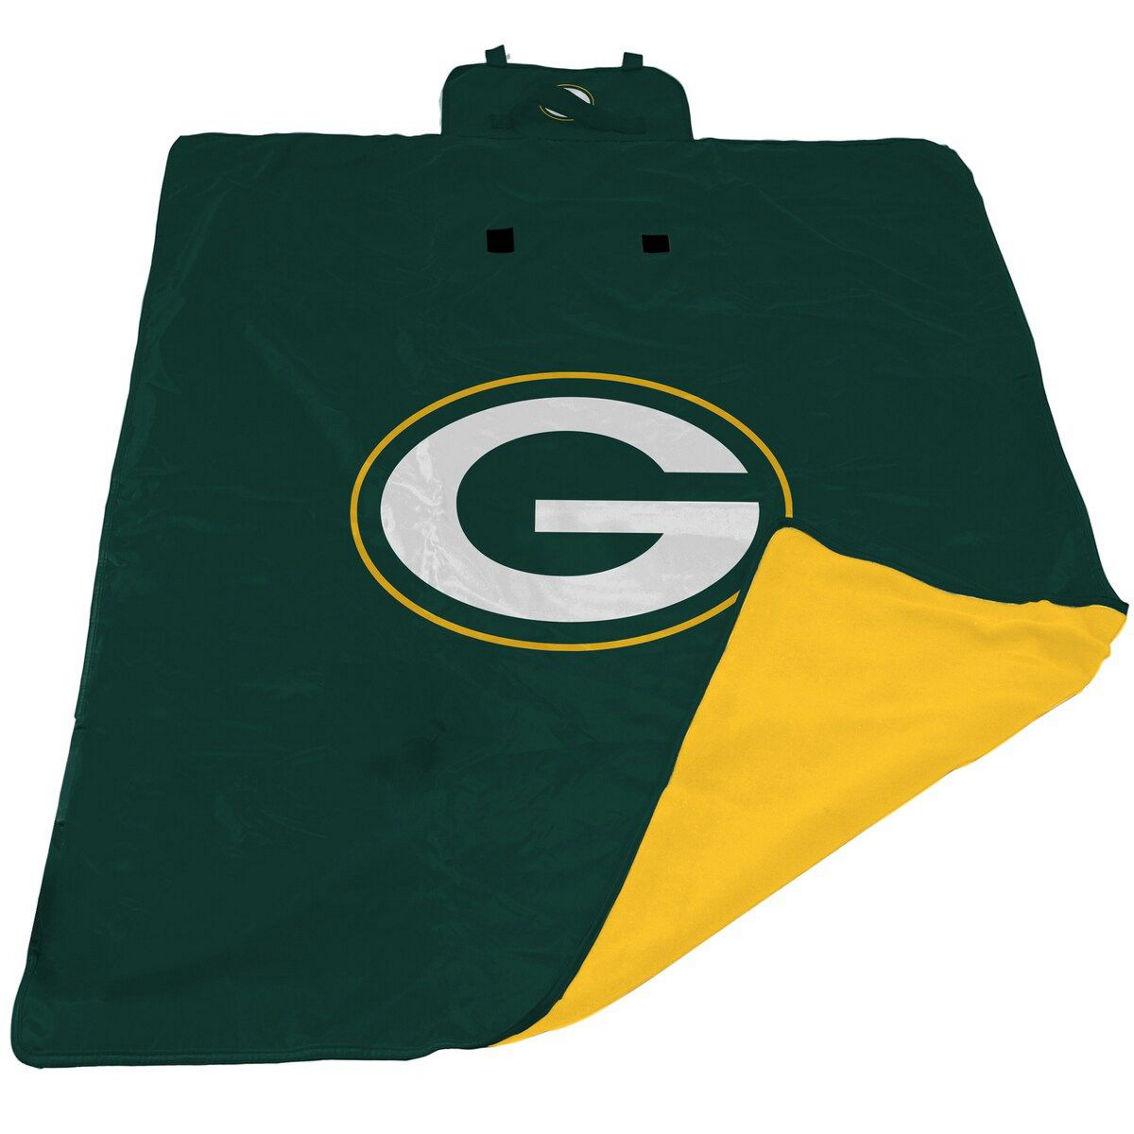 Logo Brands Green Green Bay Packers 60'' x 80'' All-Weather XL Outdoor Blanket - Image 2 of 2